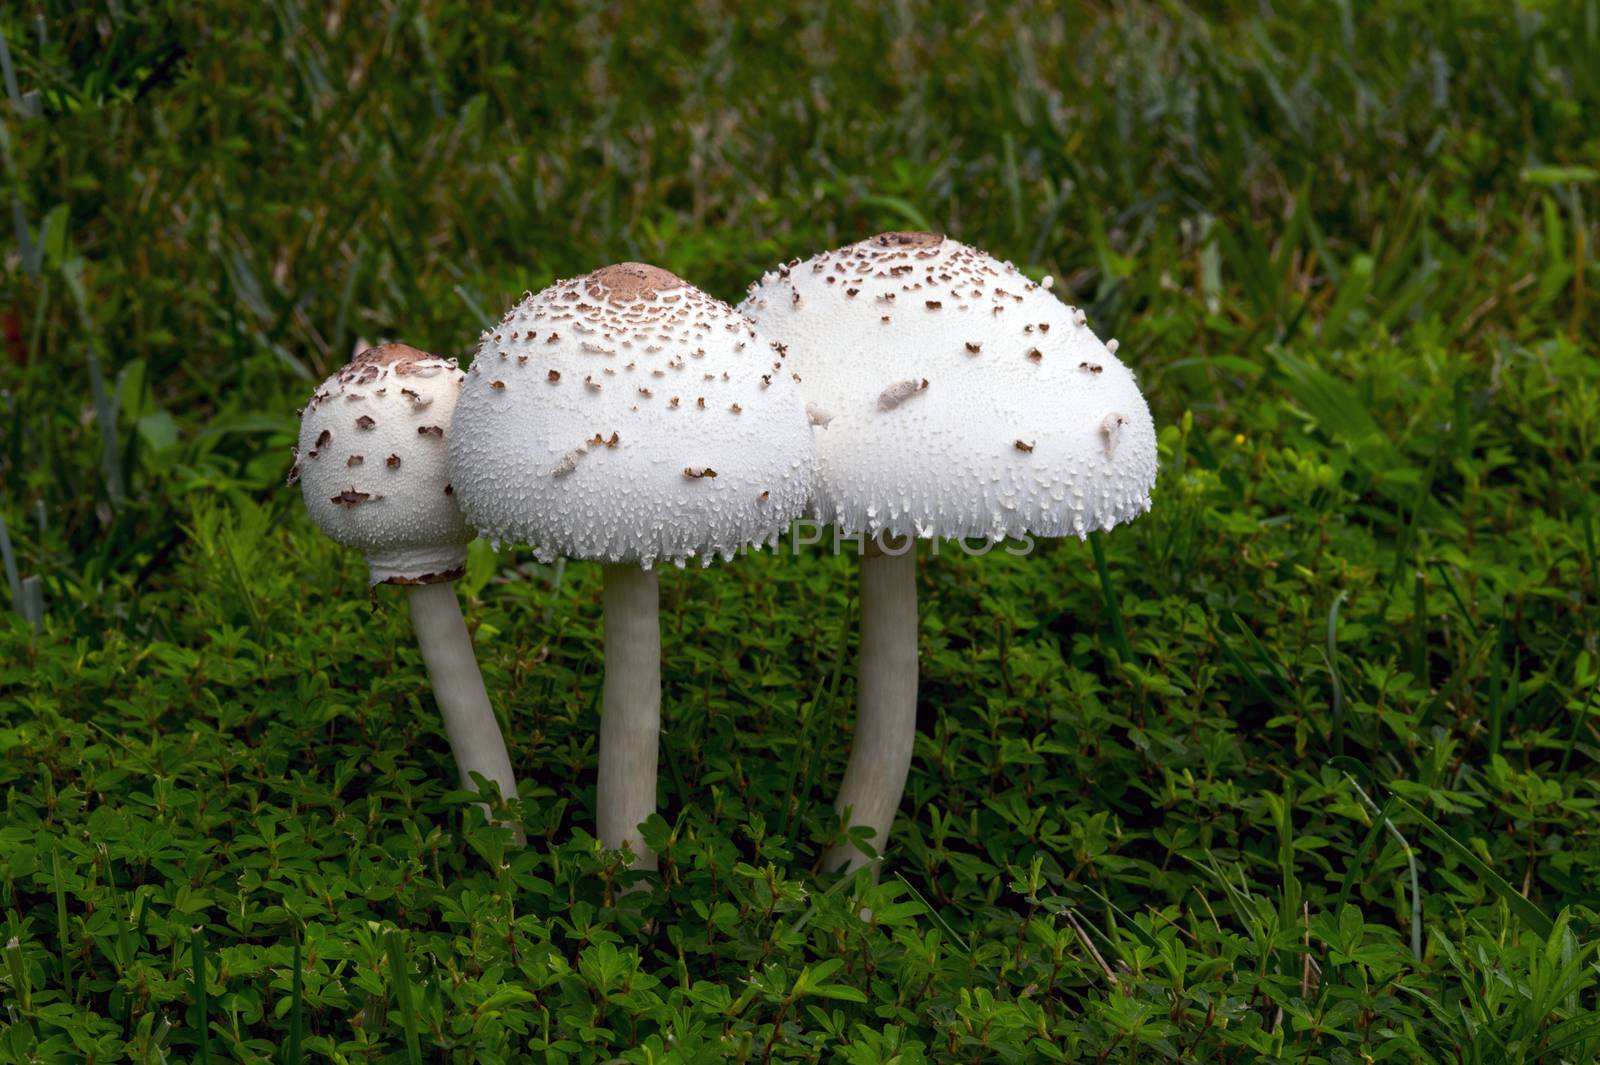 A large mushroom grown on top of grass after a rain